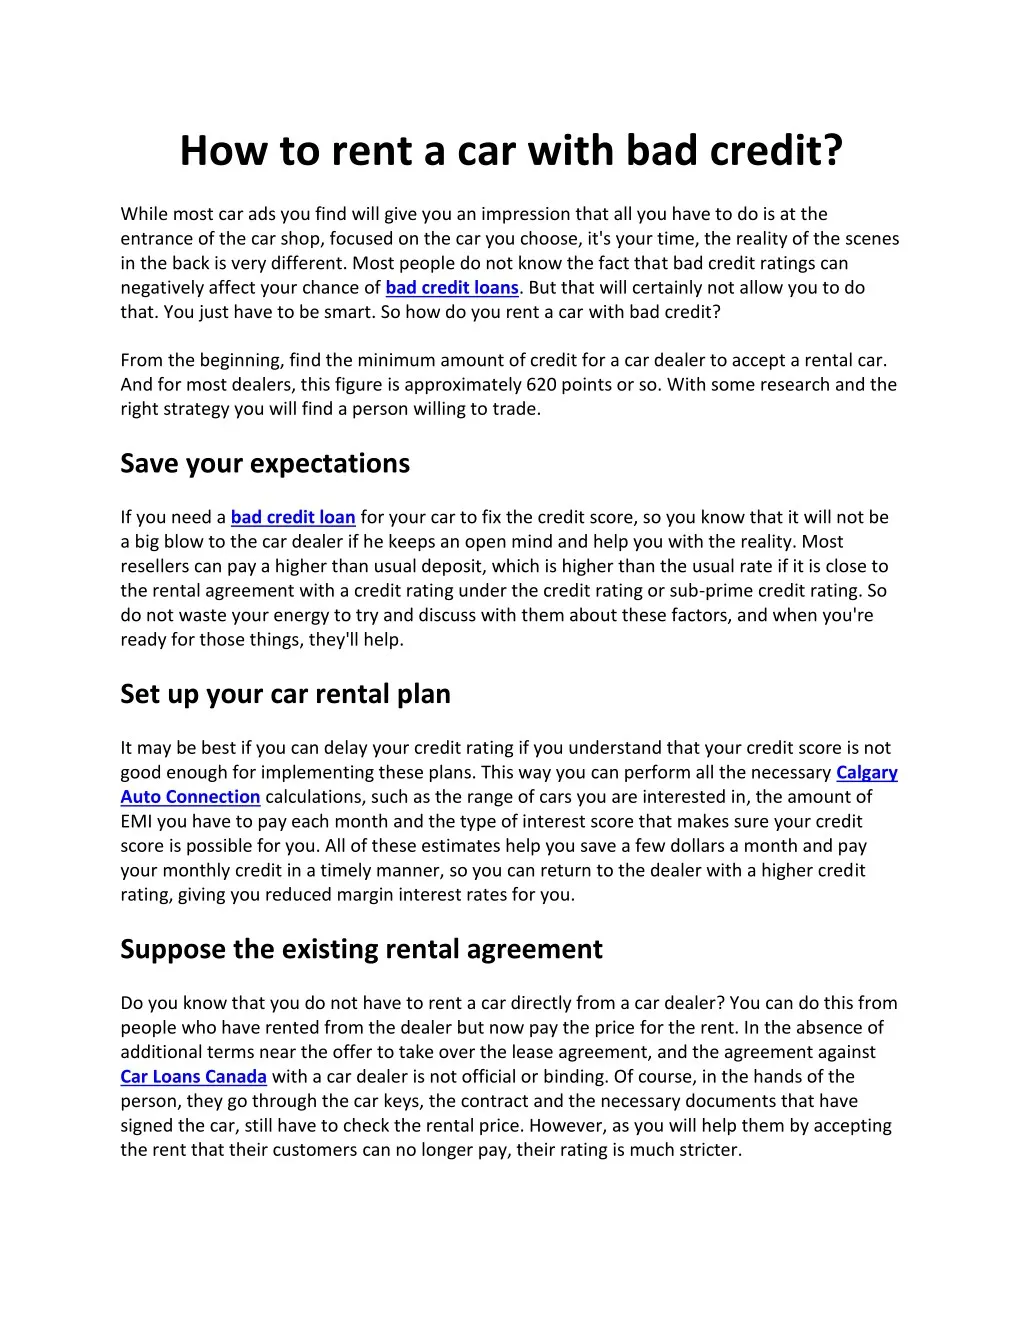 how to rent a car with bad credit